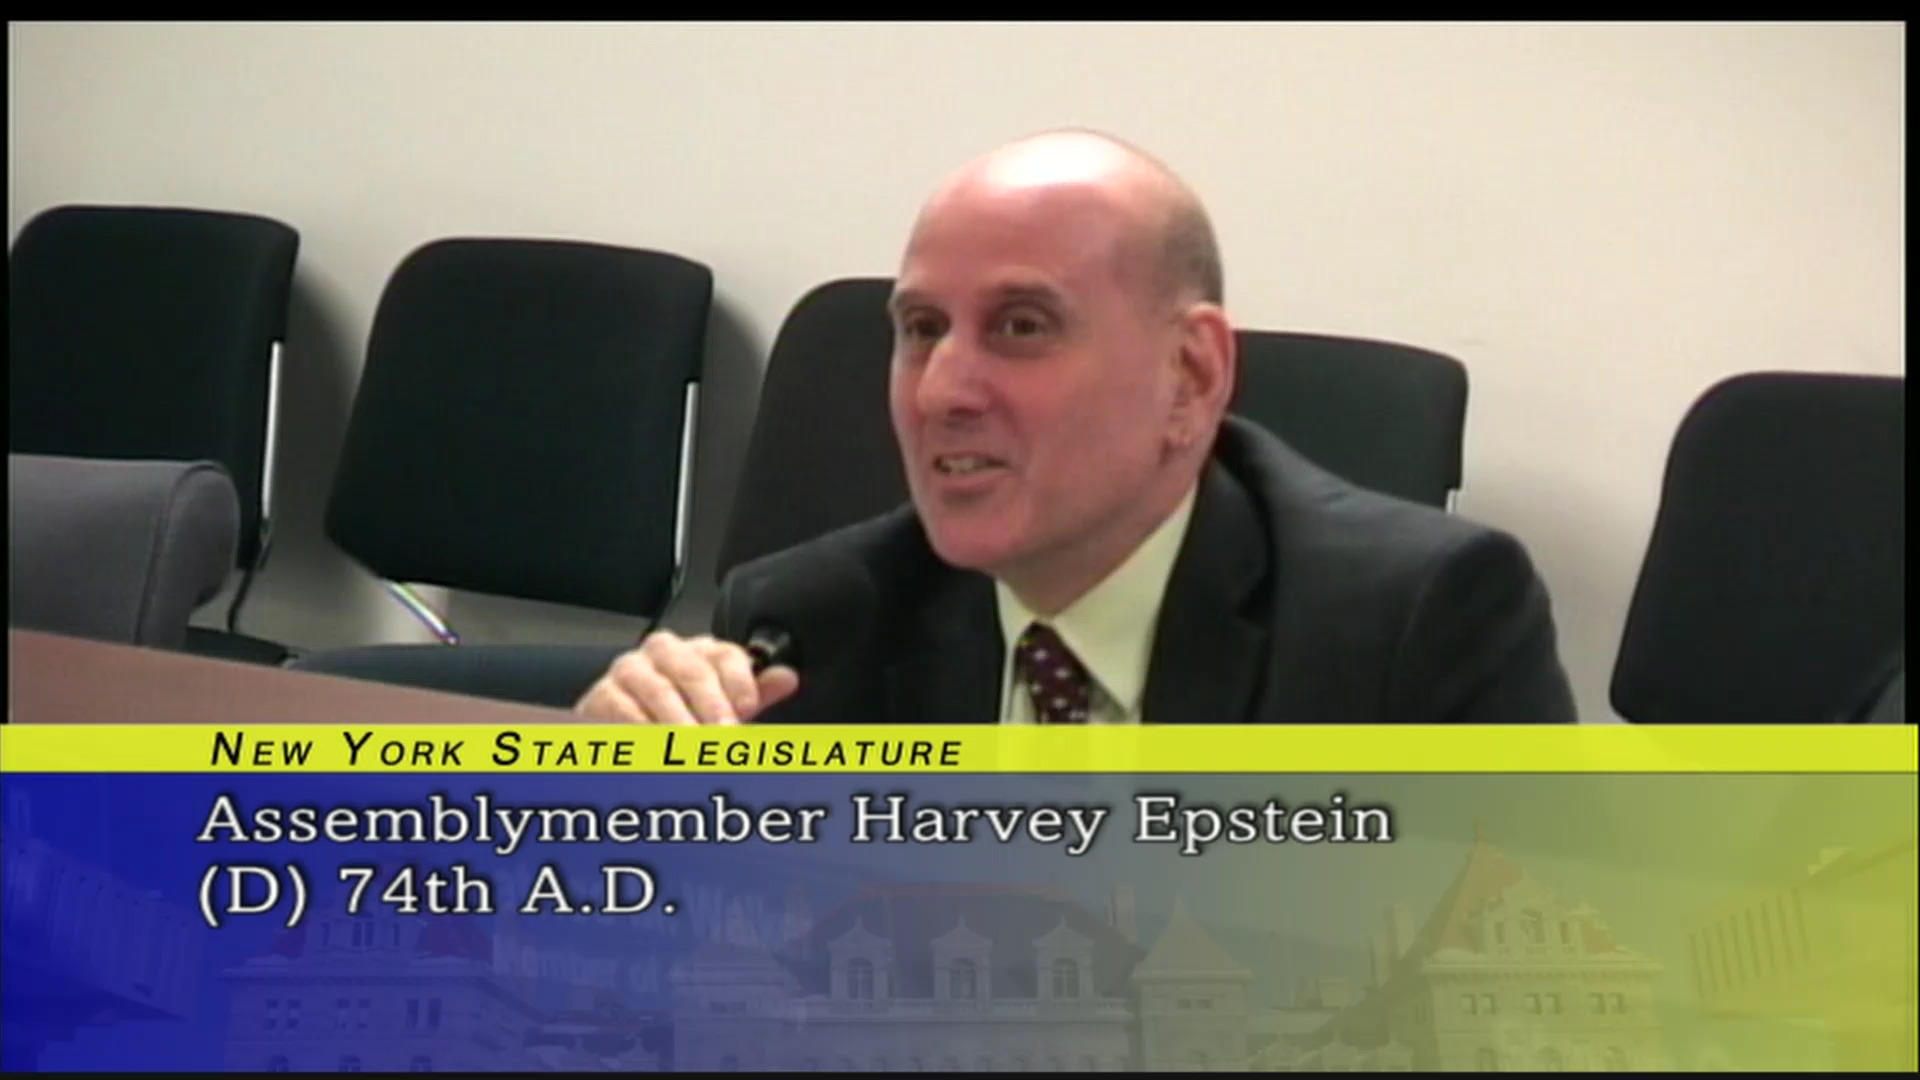 Epstein Discusses Net Operating Income Increases for Property Owners